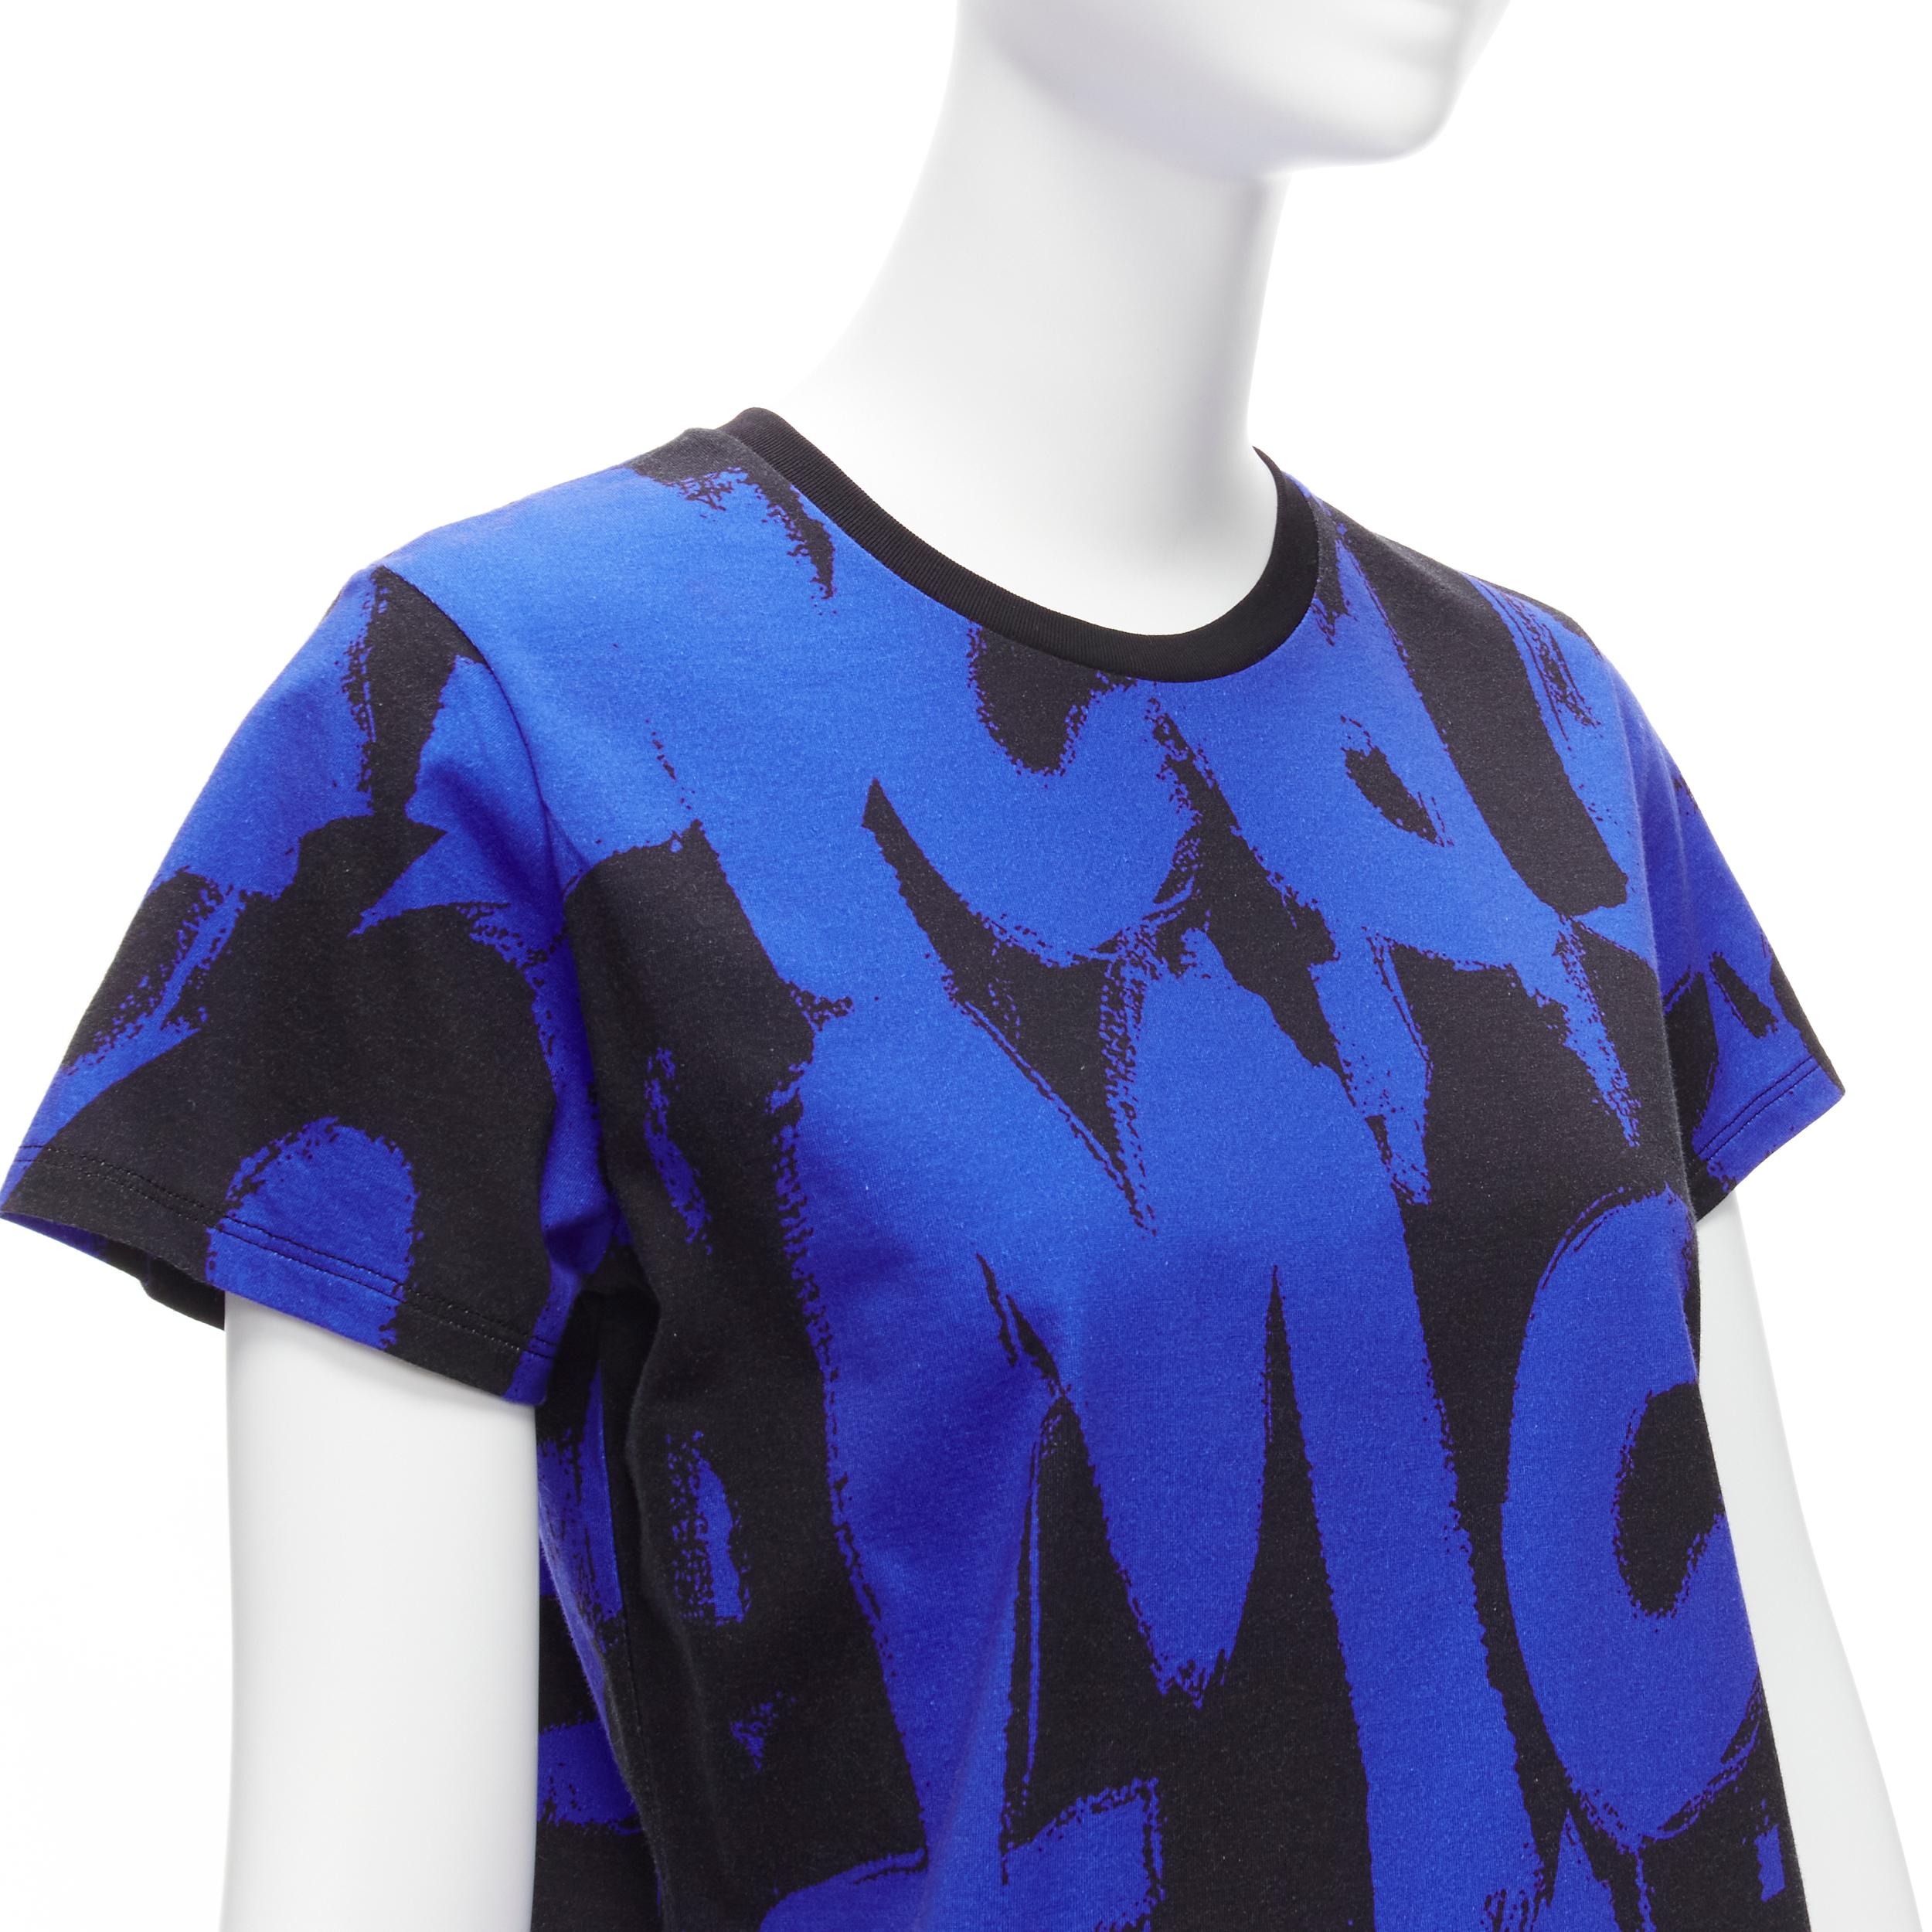 ALEXANDER MCQUEEN 2022 Brush blue black graffiti cotton tshirt IT38 XS
Reference: AAWC/A00455
Brand: Alexander McQueen
Designer: Sarah Burton
Collection: 2022
Material: Cotton
Color: Blue, Black
Pattern: Abstract
Closure: Pullover
Made in: